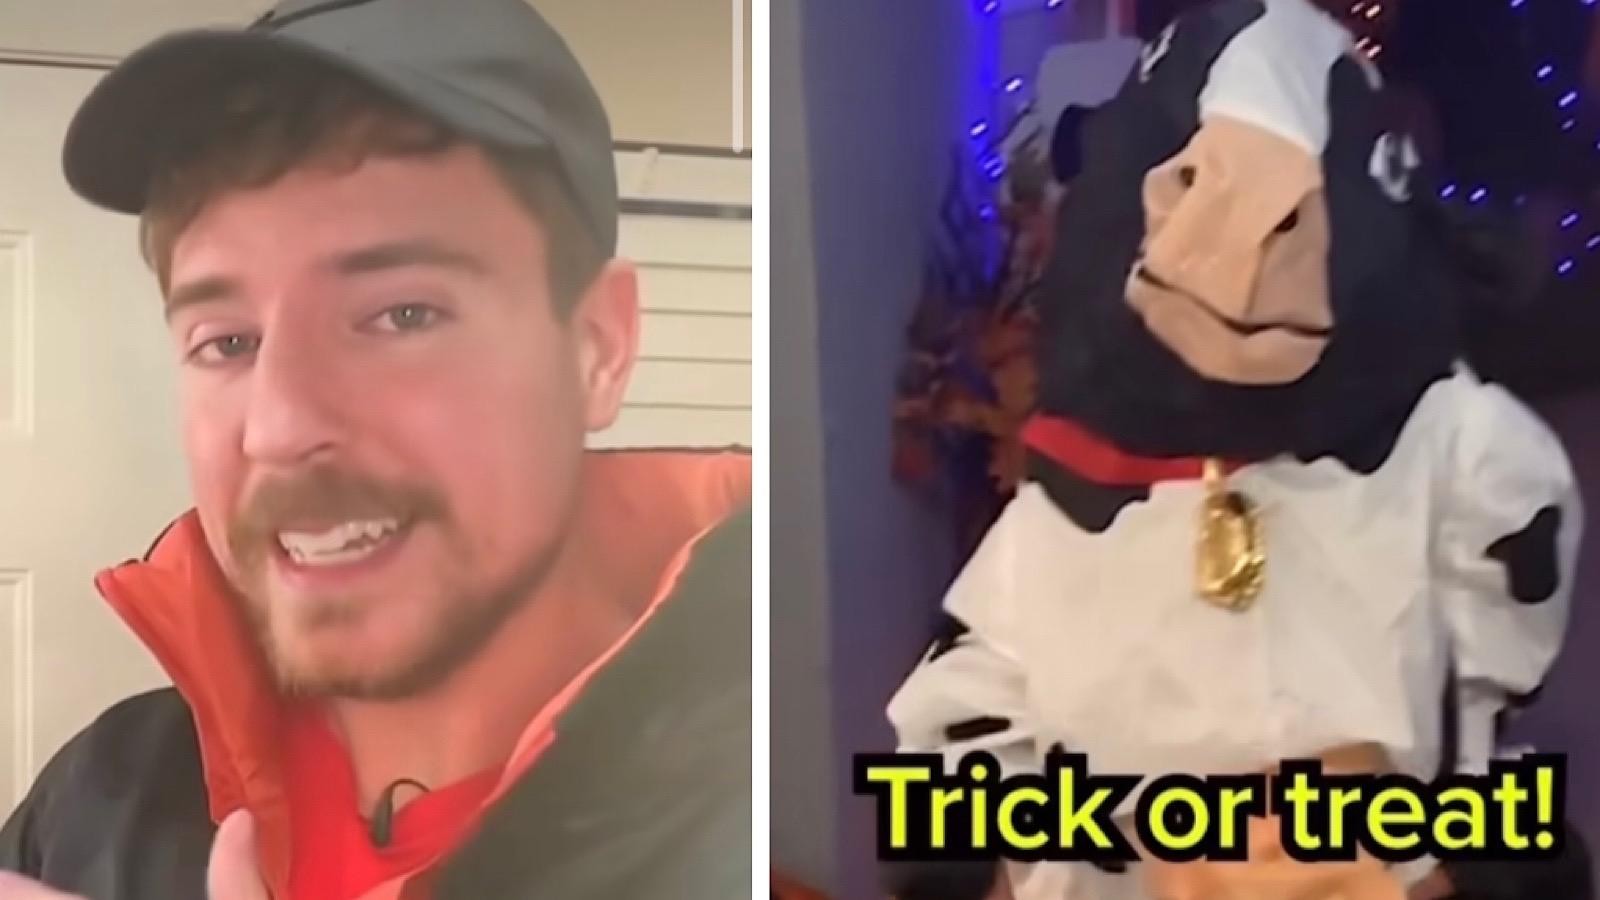 mrbeast gifts a trick-or-treater a free home for halloween